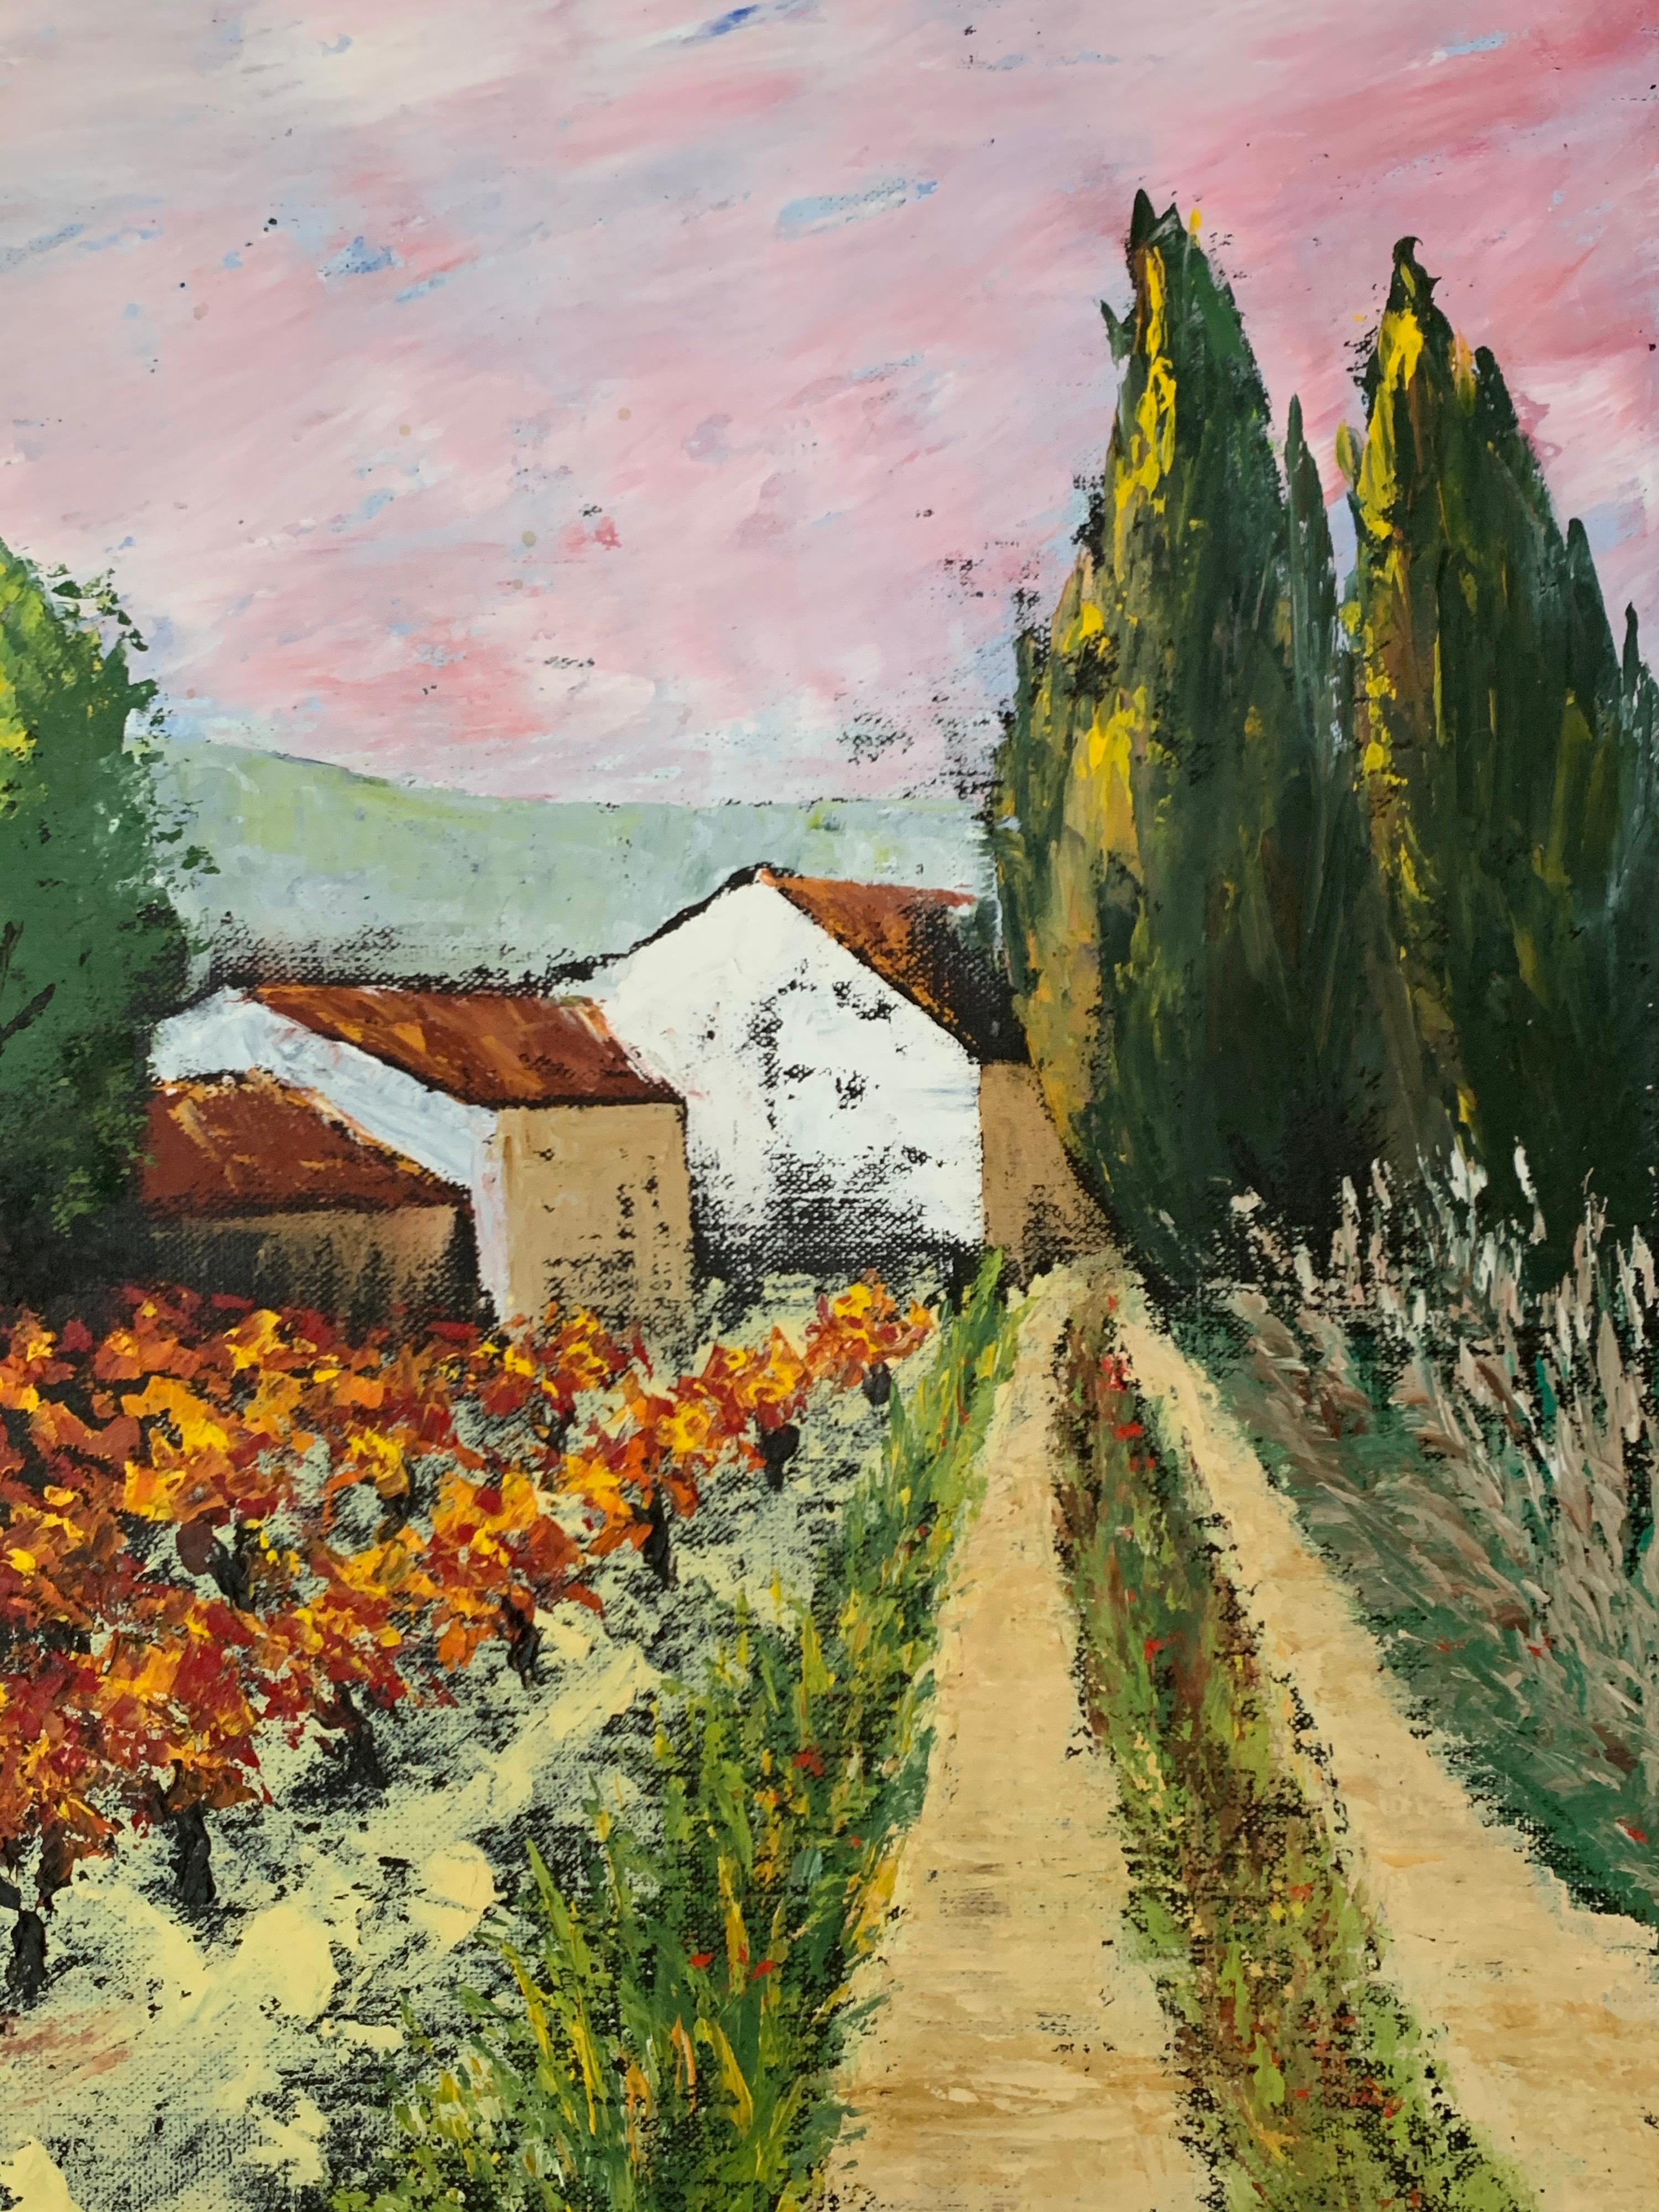 Autumn Vineyard in Provence, Cypress Trees and Provencal House, Oil Painting - Brown Landscape Painting by Provence artist